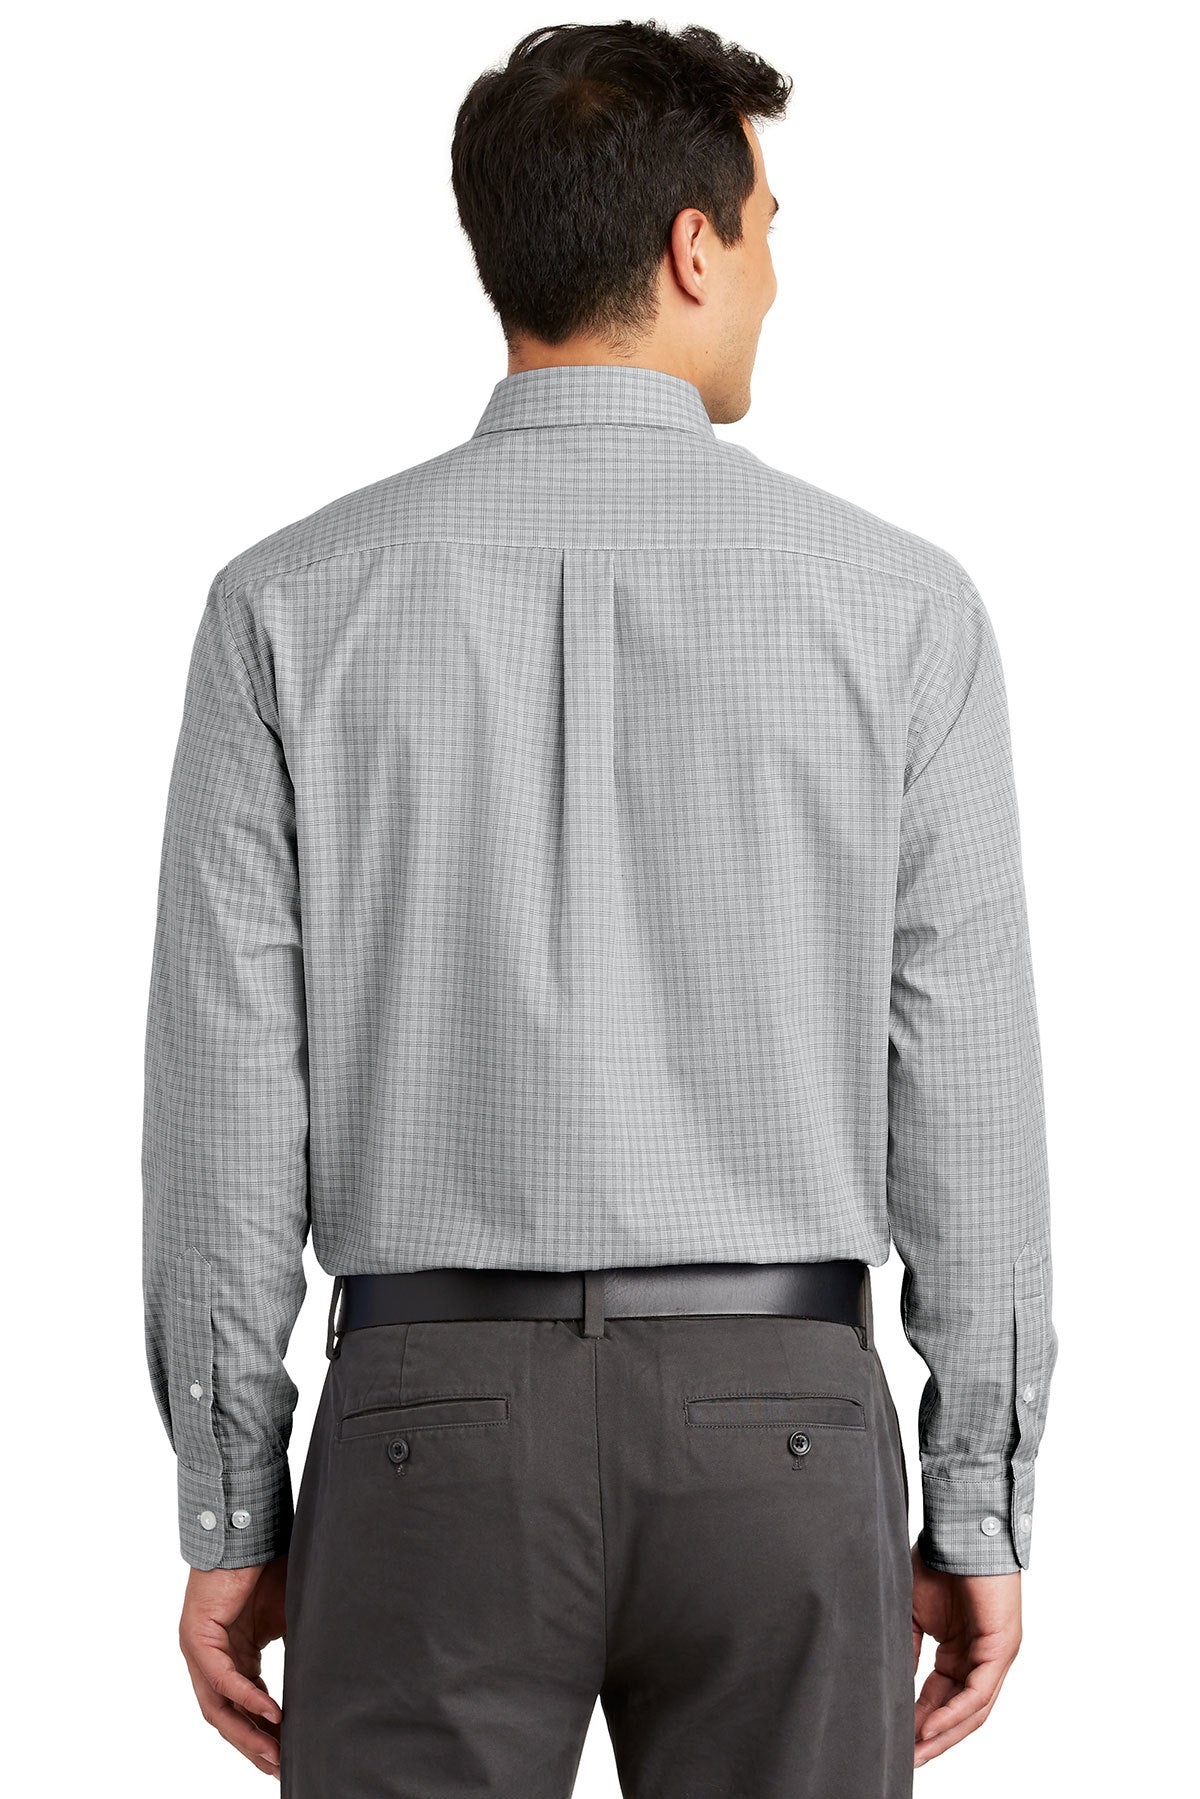 port authority_s639 _charcoal_company_logo_button downs